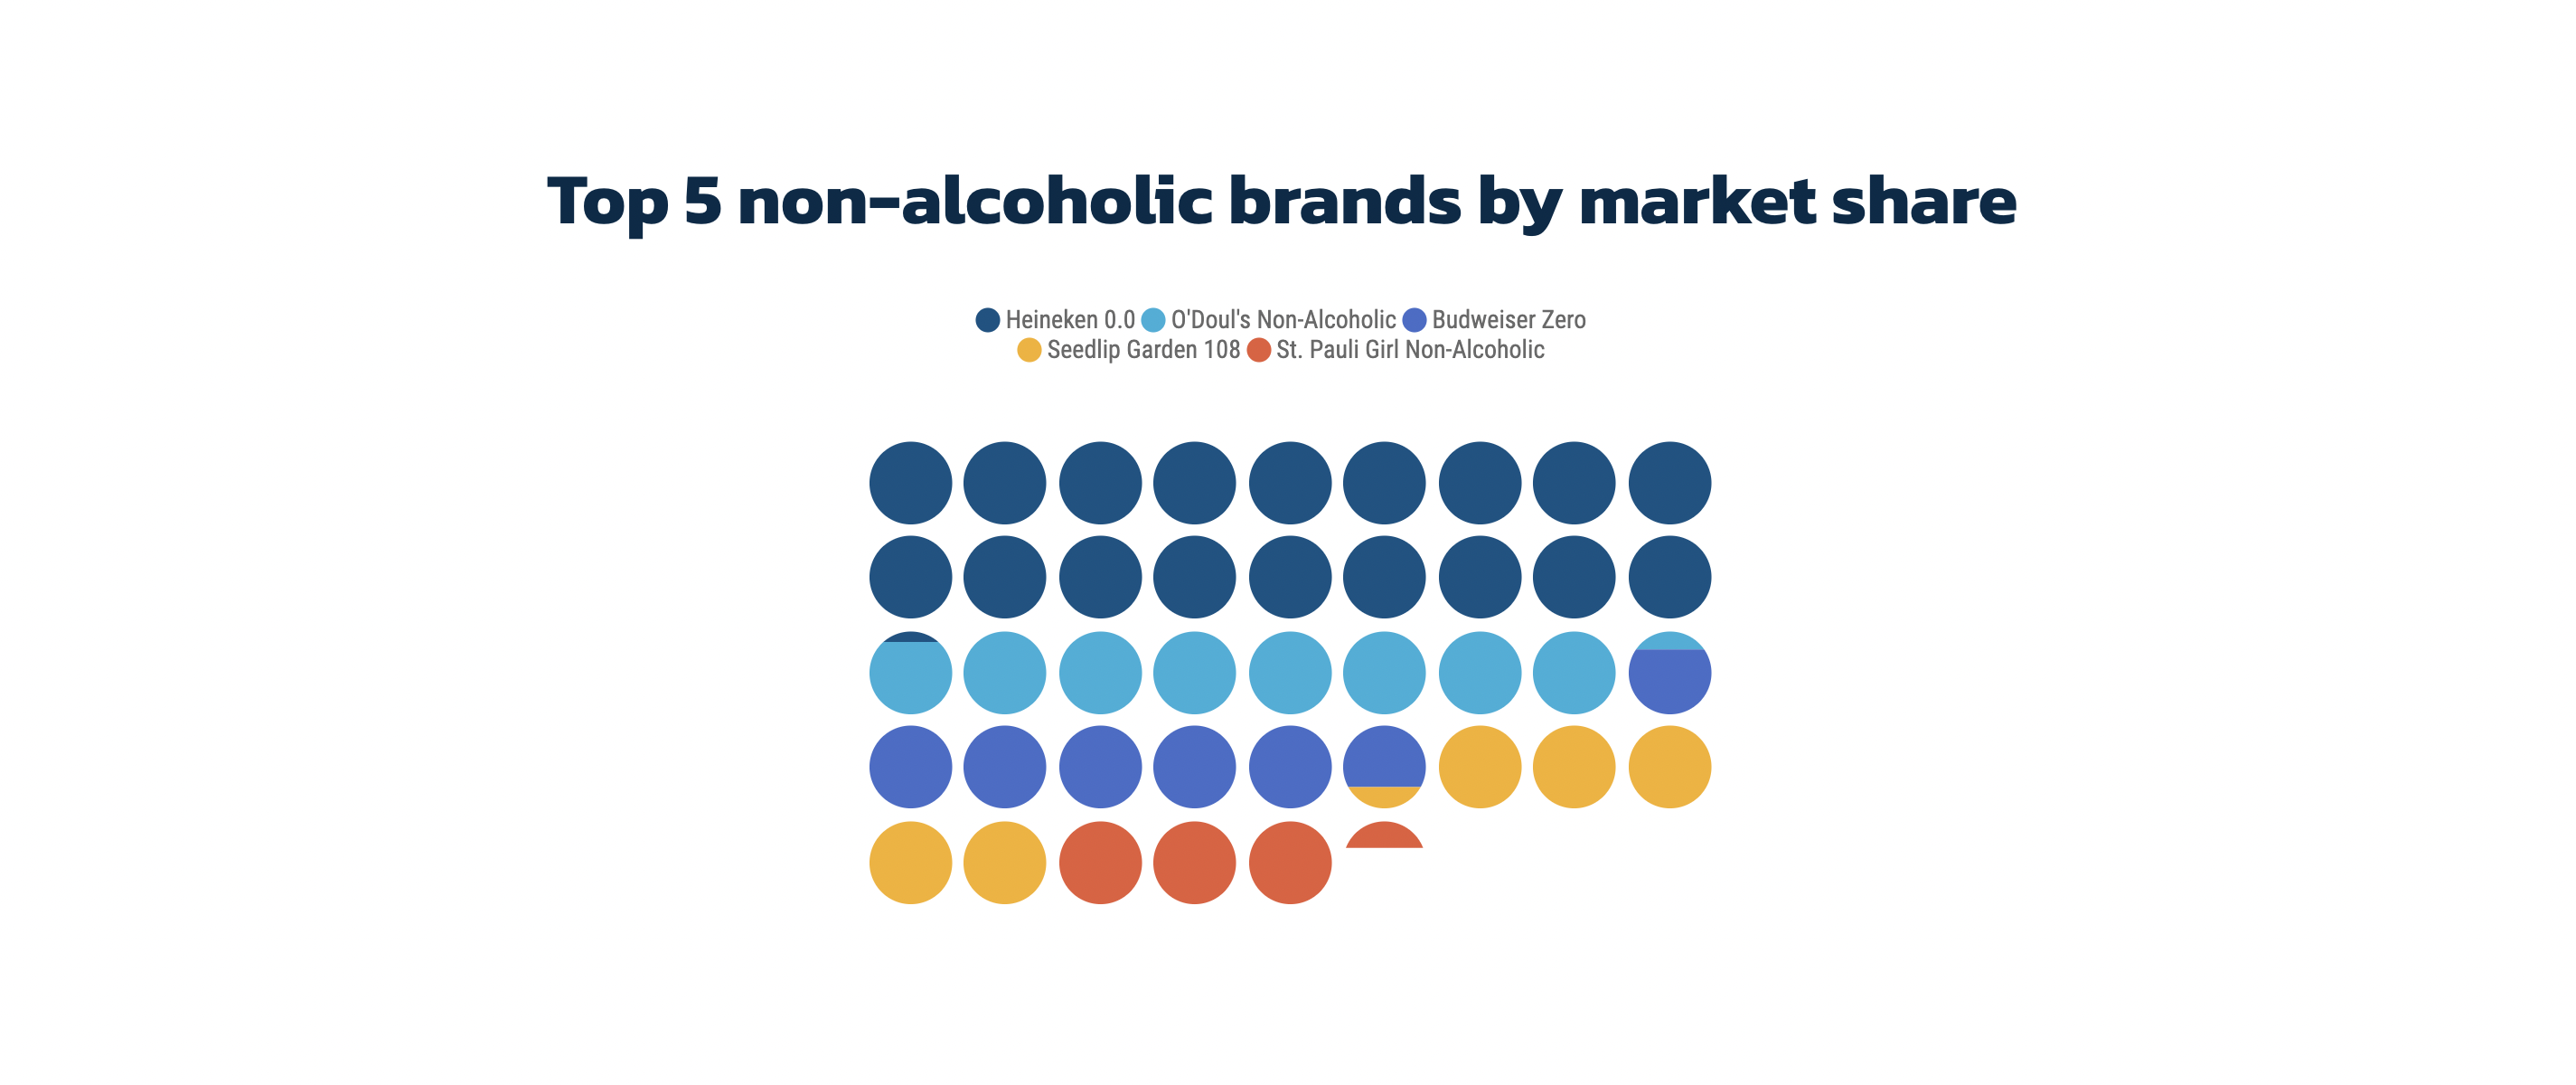 Top 5 non-alcoholic brands by market share